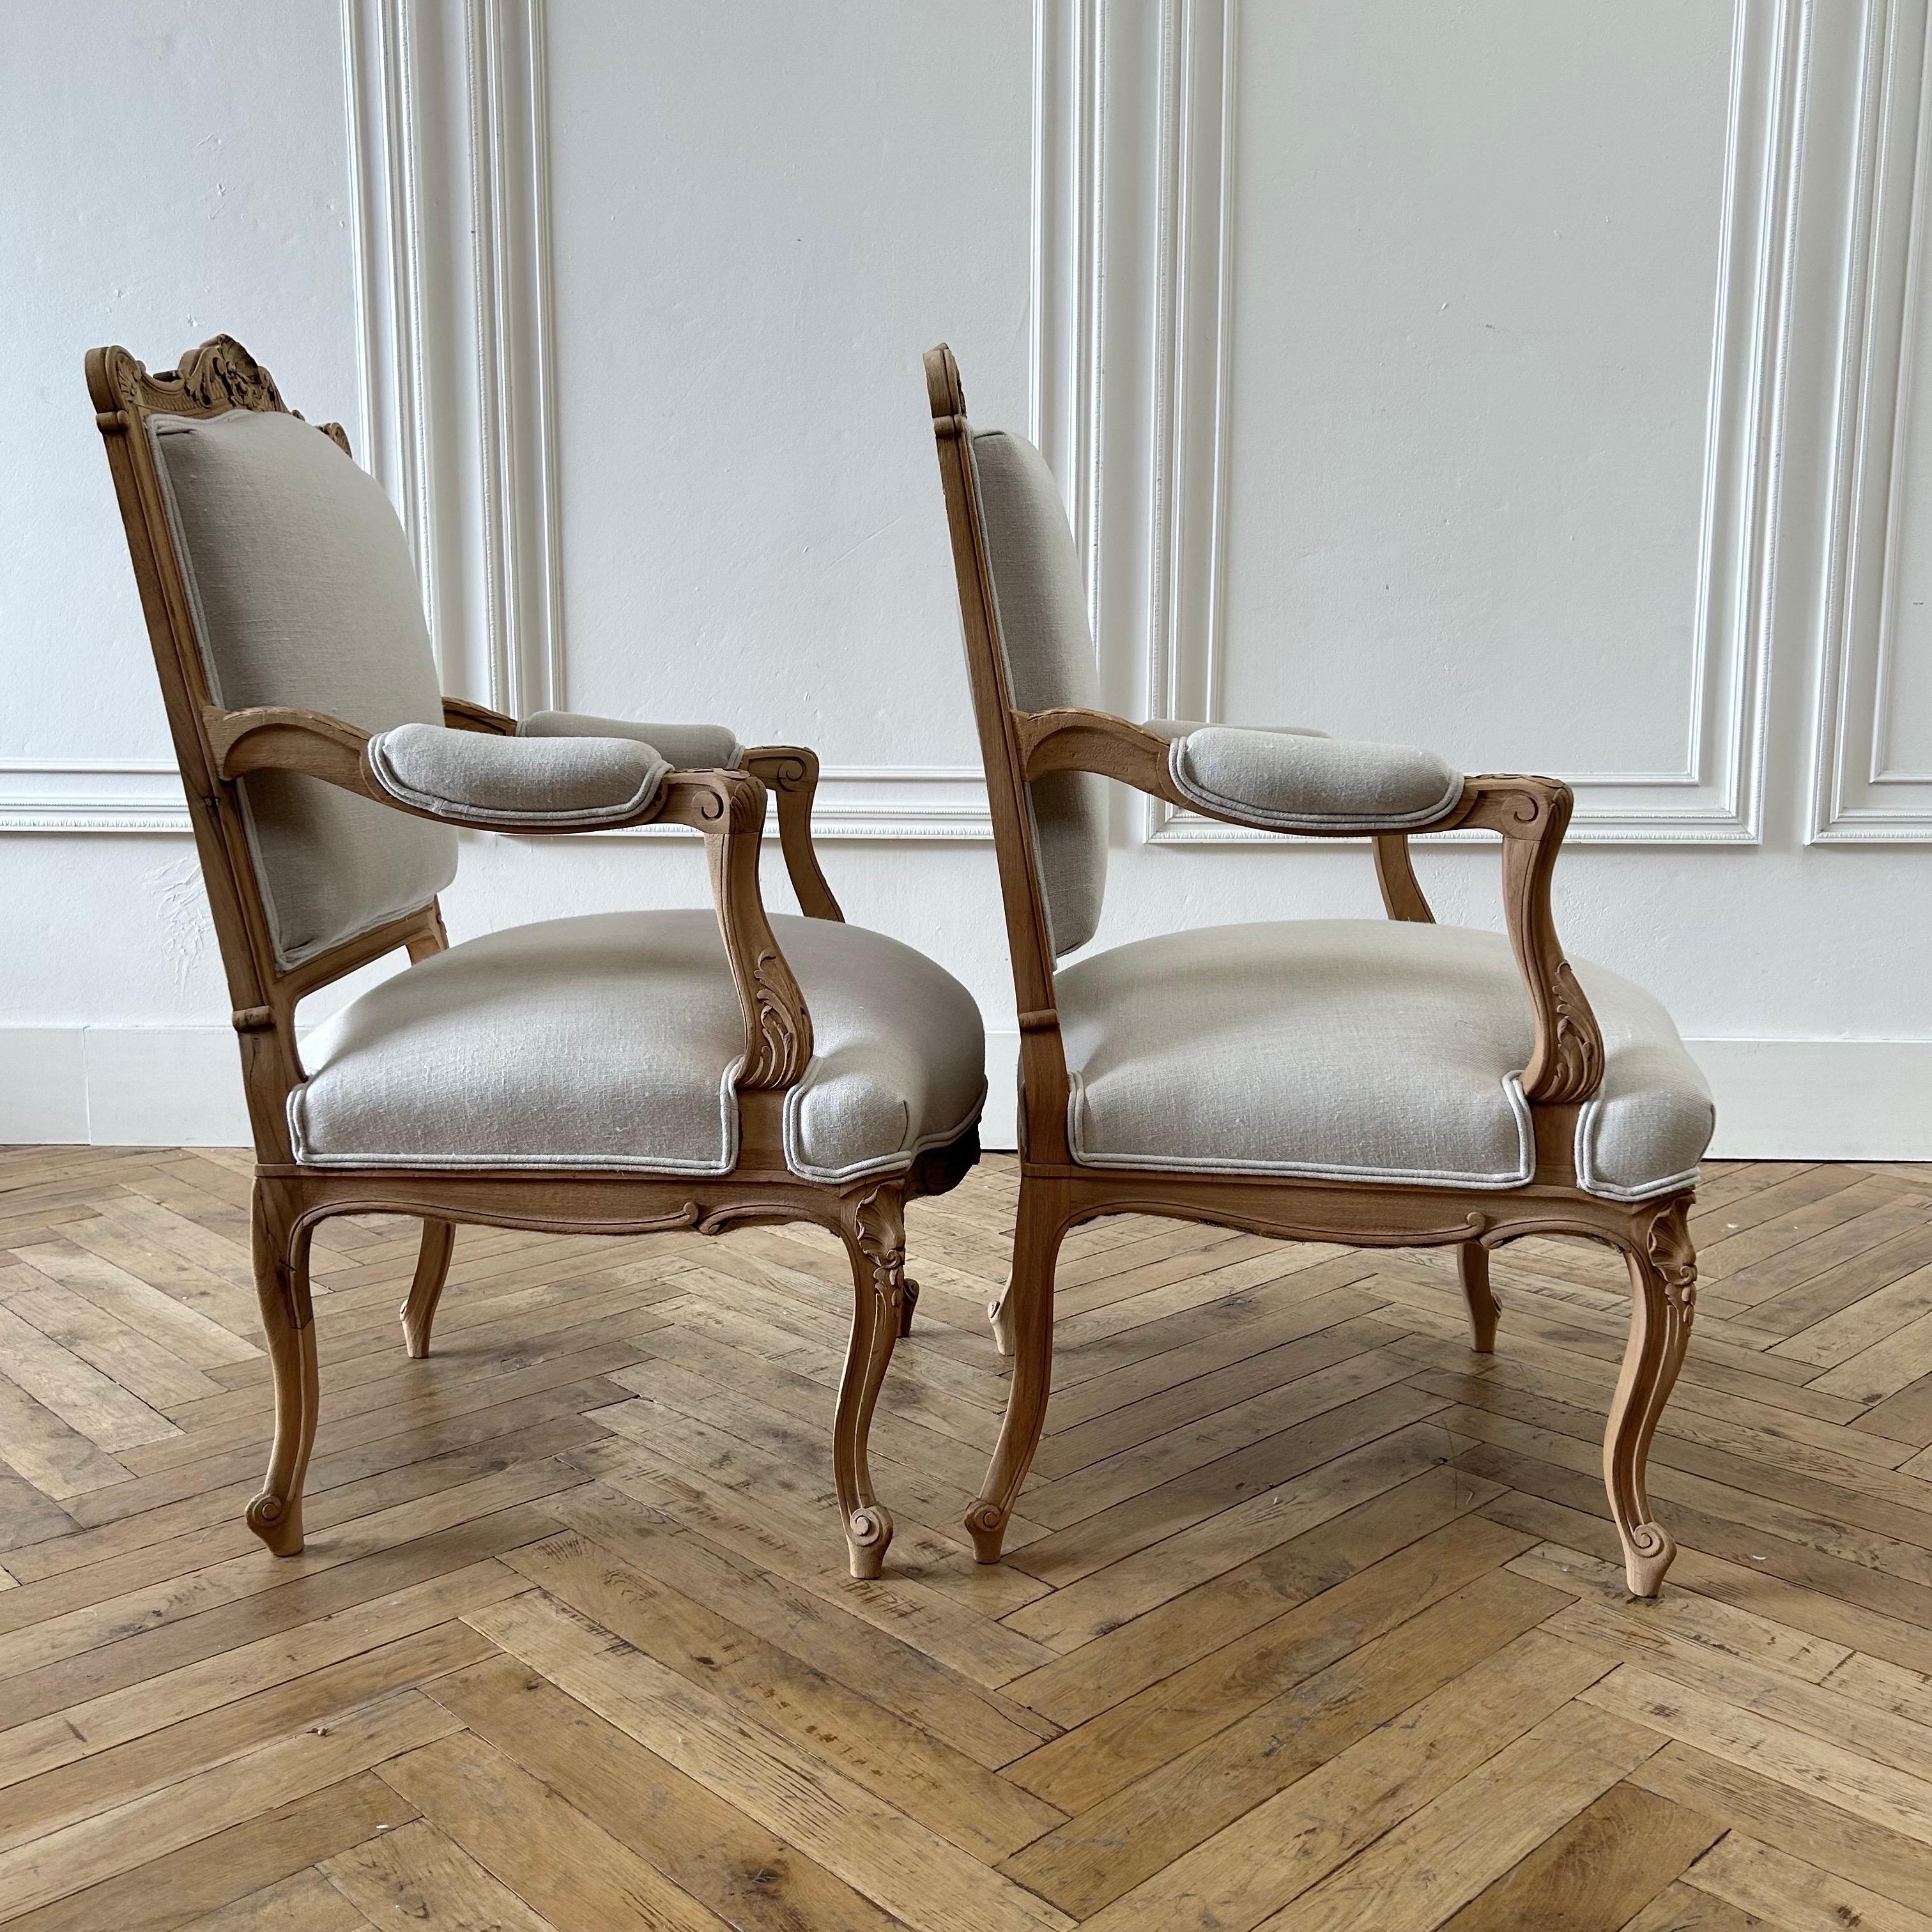 Early 20th Century Bleached Walnut and Linen Upholstered Open Arm Chairs 1